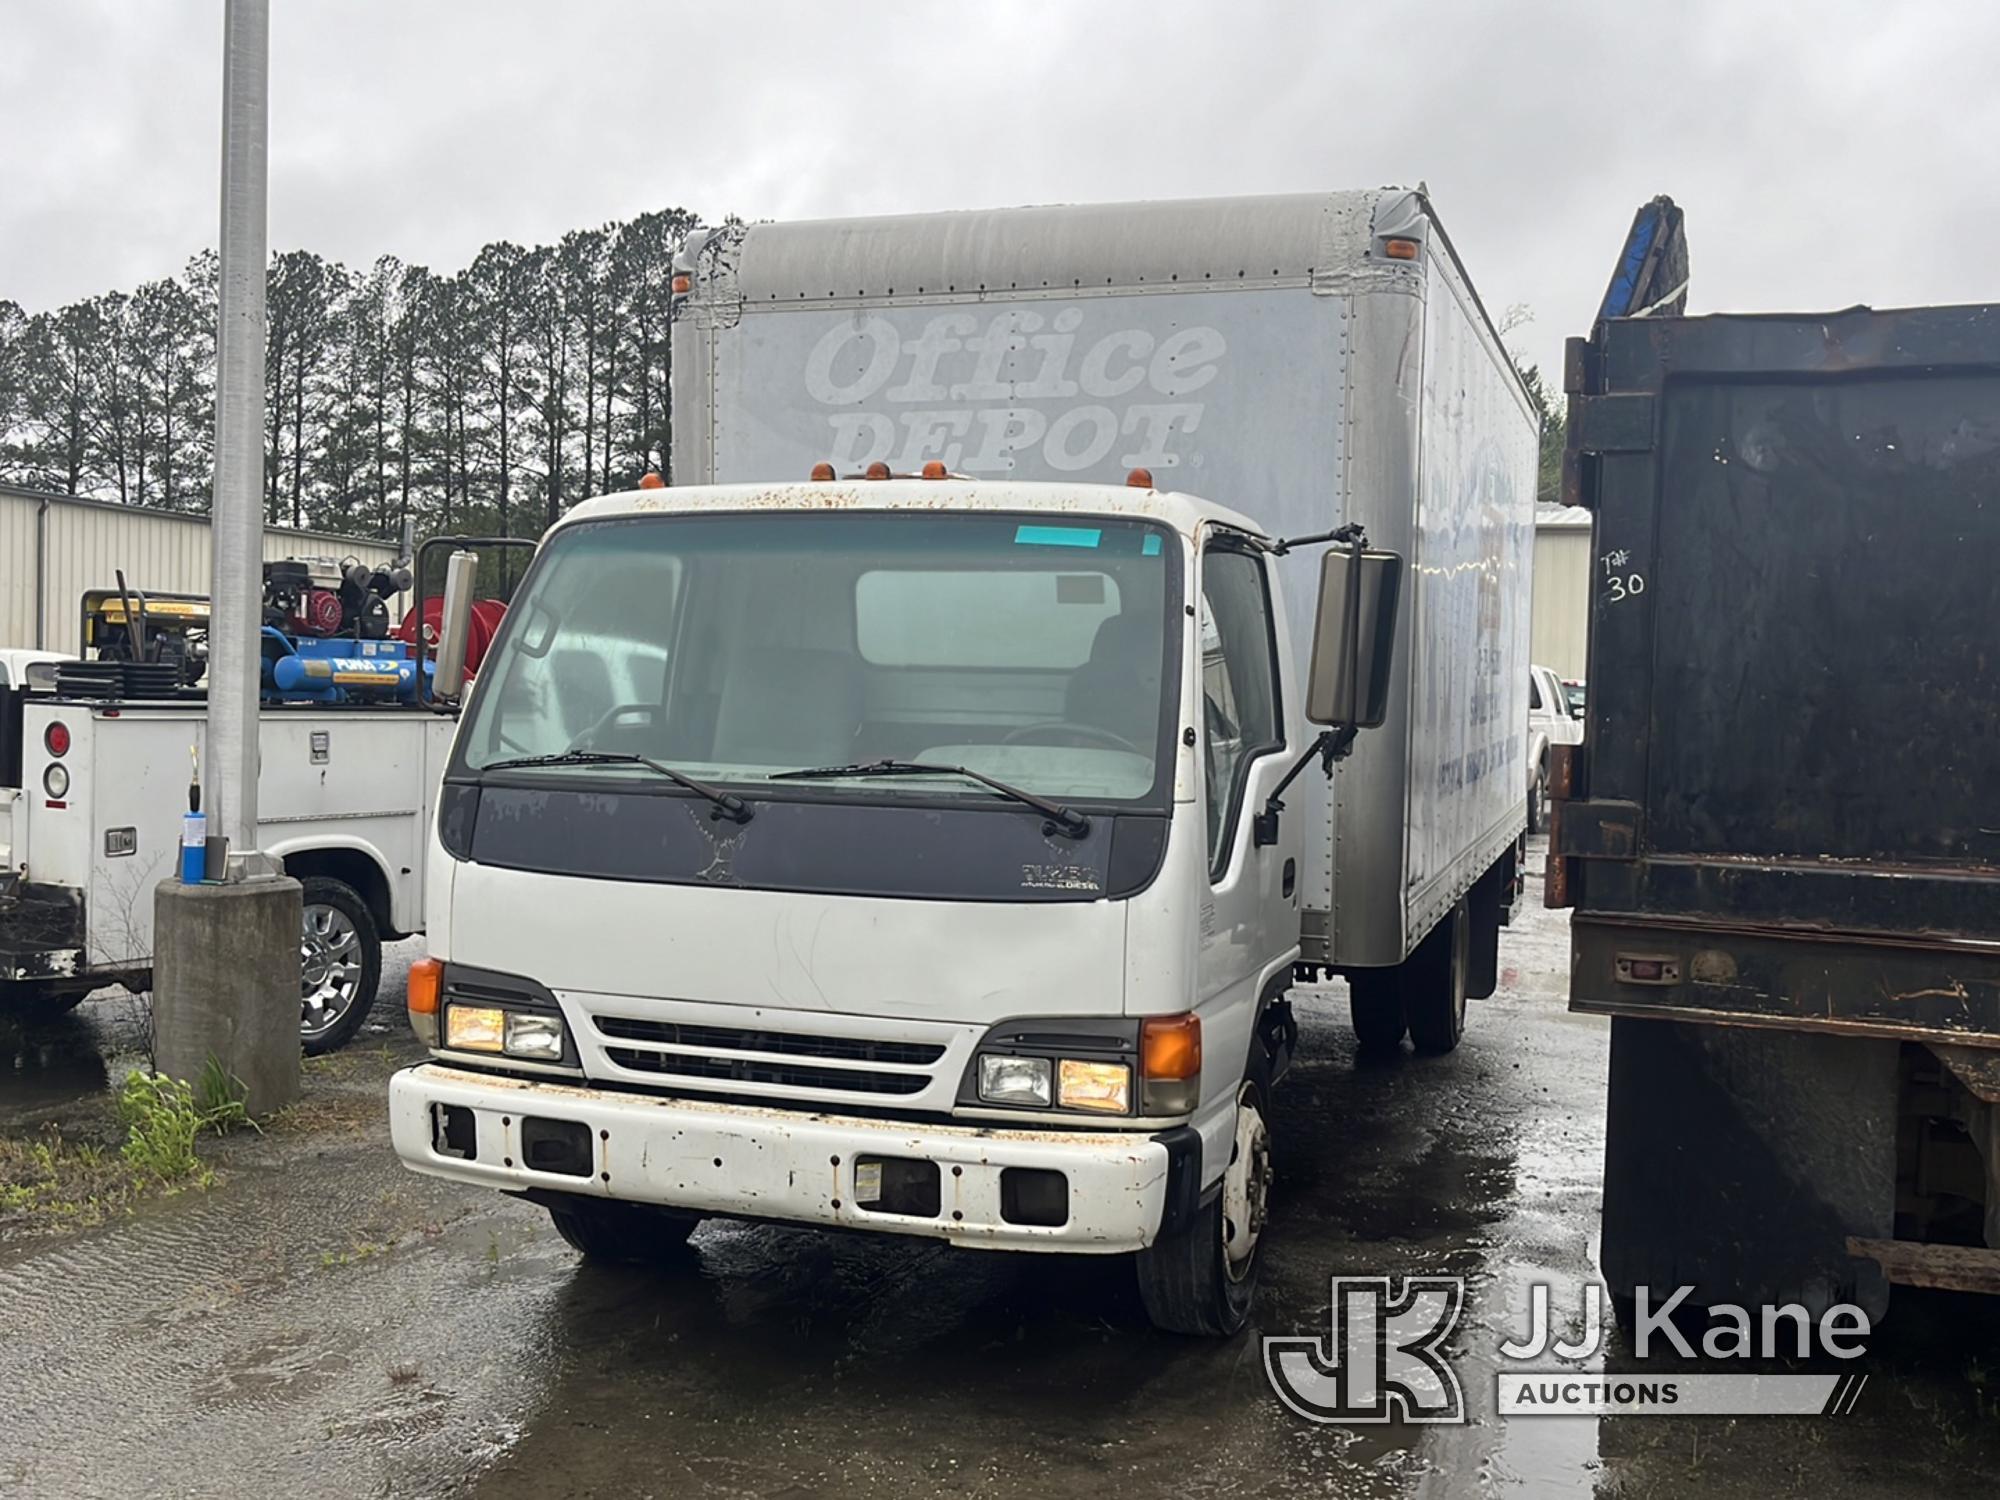 (Supply, NC) 2002 Isuzu NQR Van Body Truck Runs) (Does Not Move, Transmission Issues, Condition Unkn